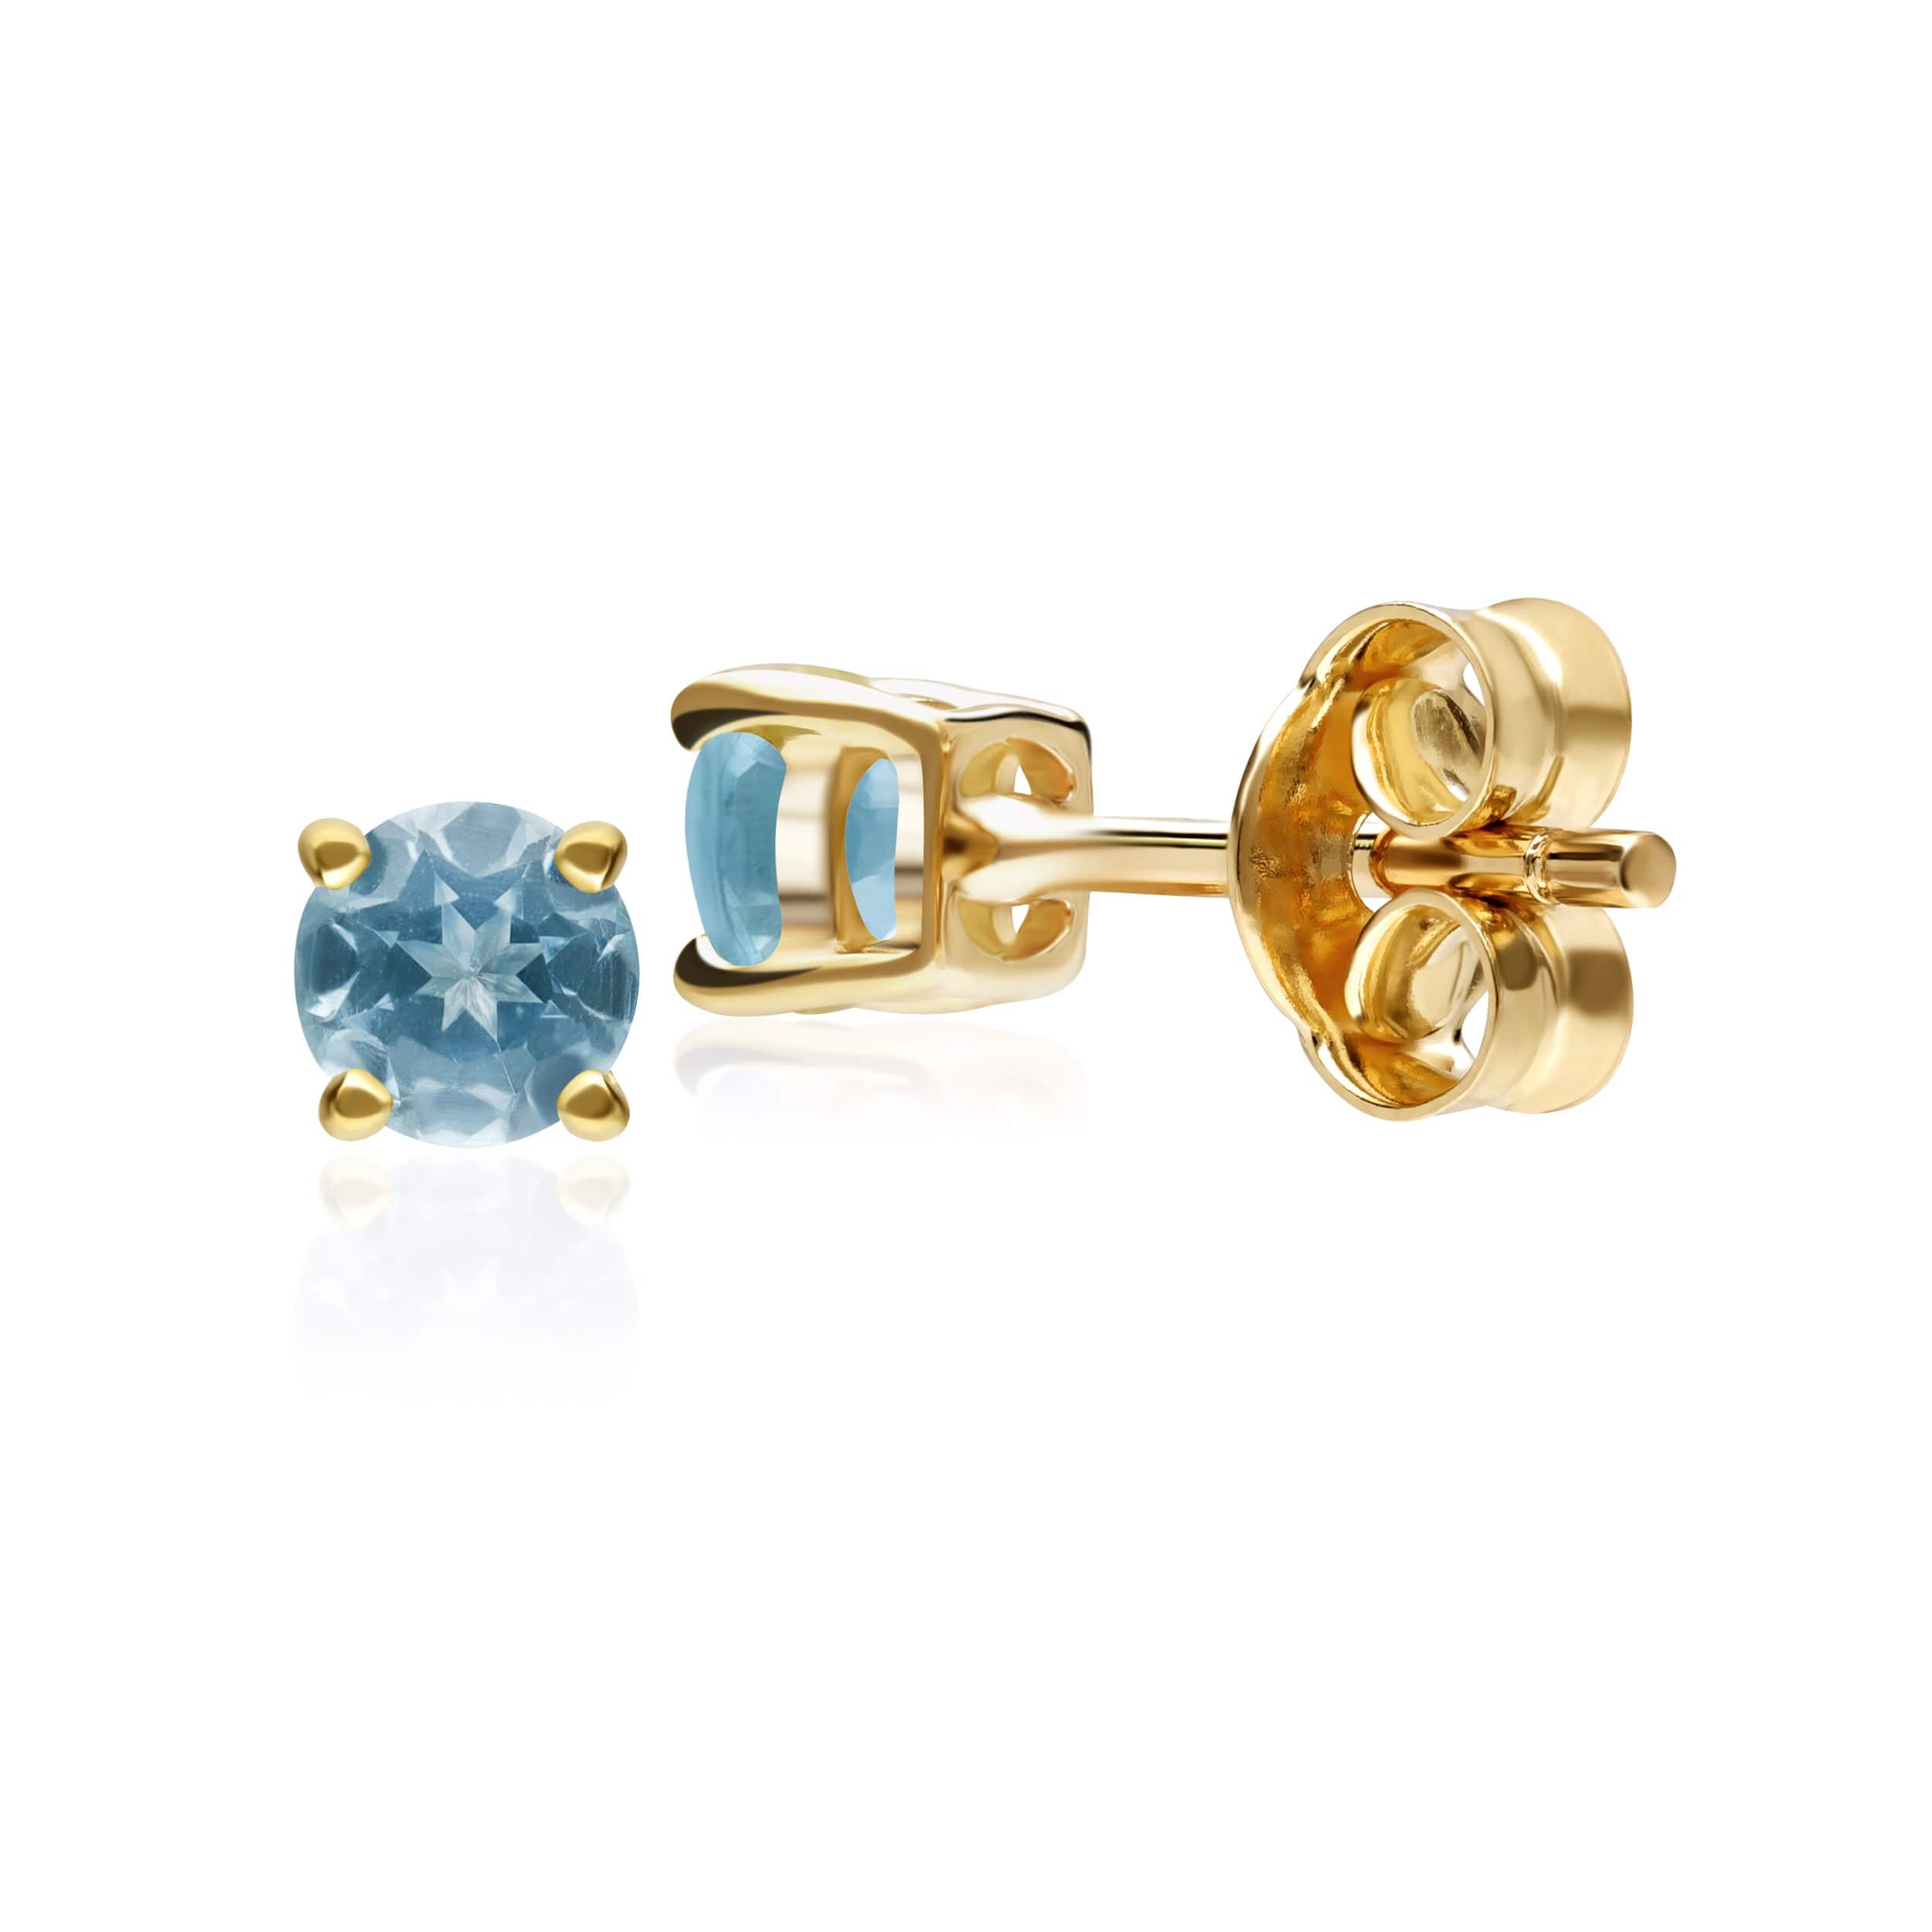 11555 Classic Round Blue Topaz Stud Earrings in 9ct Yellow Gold 2